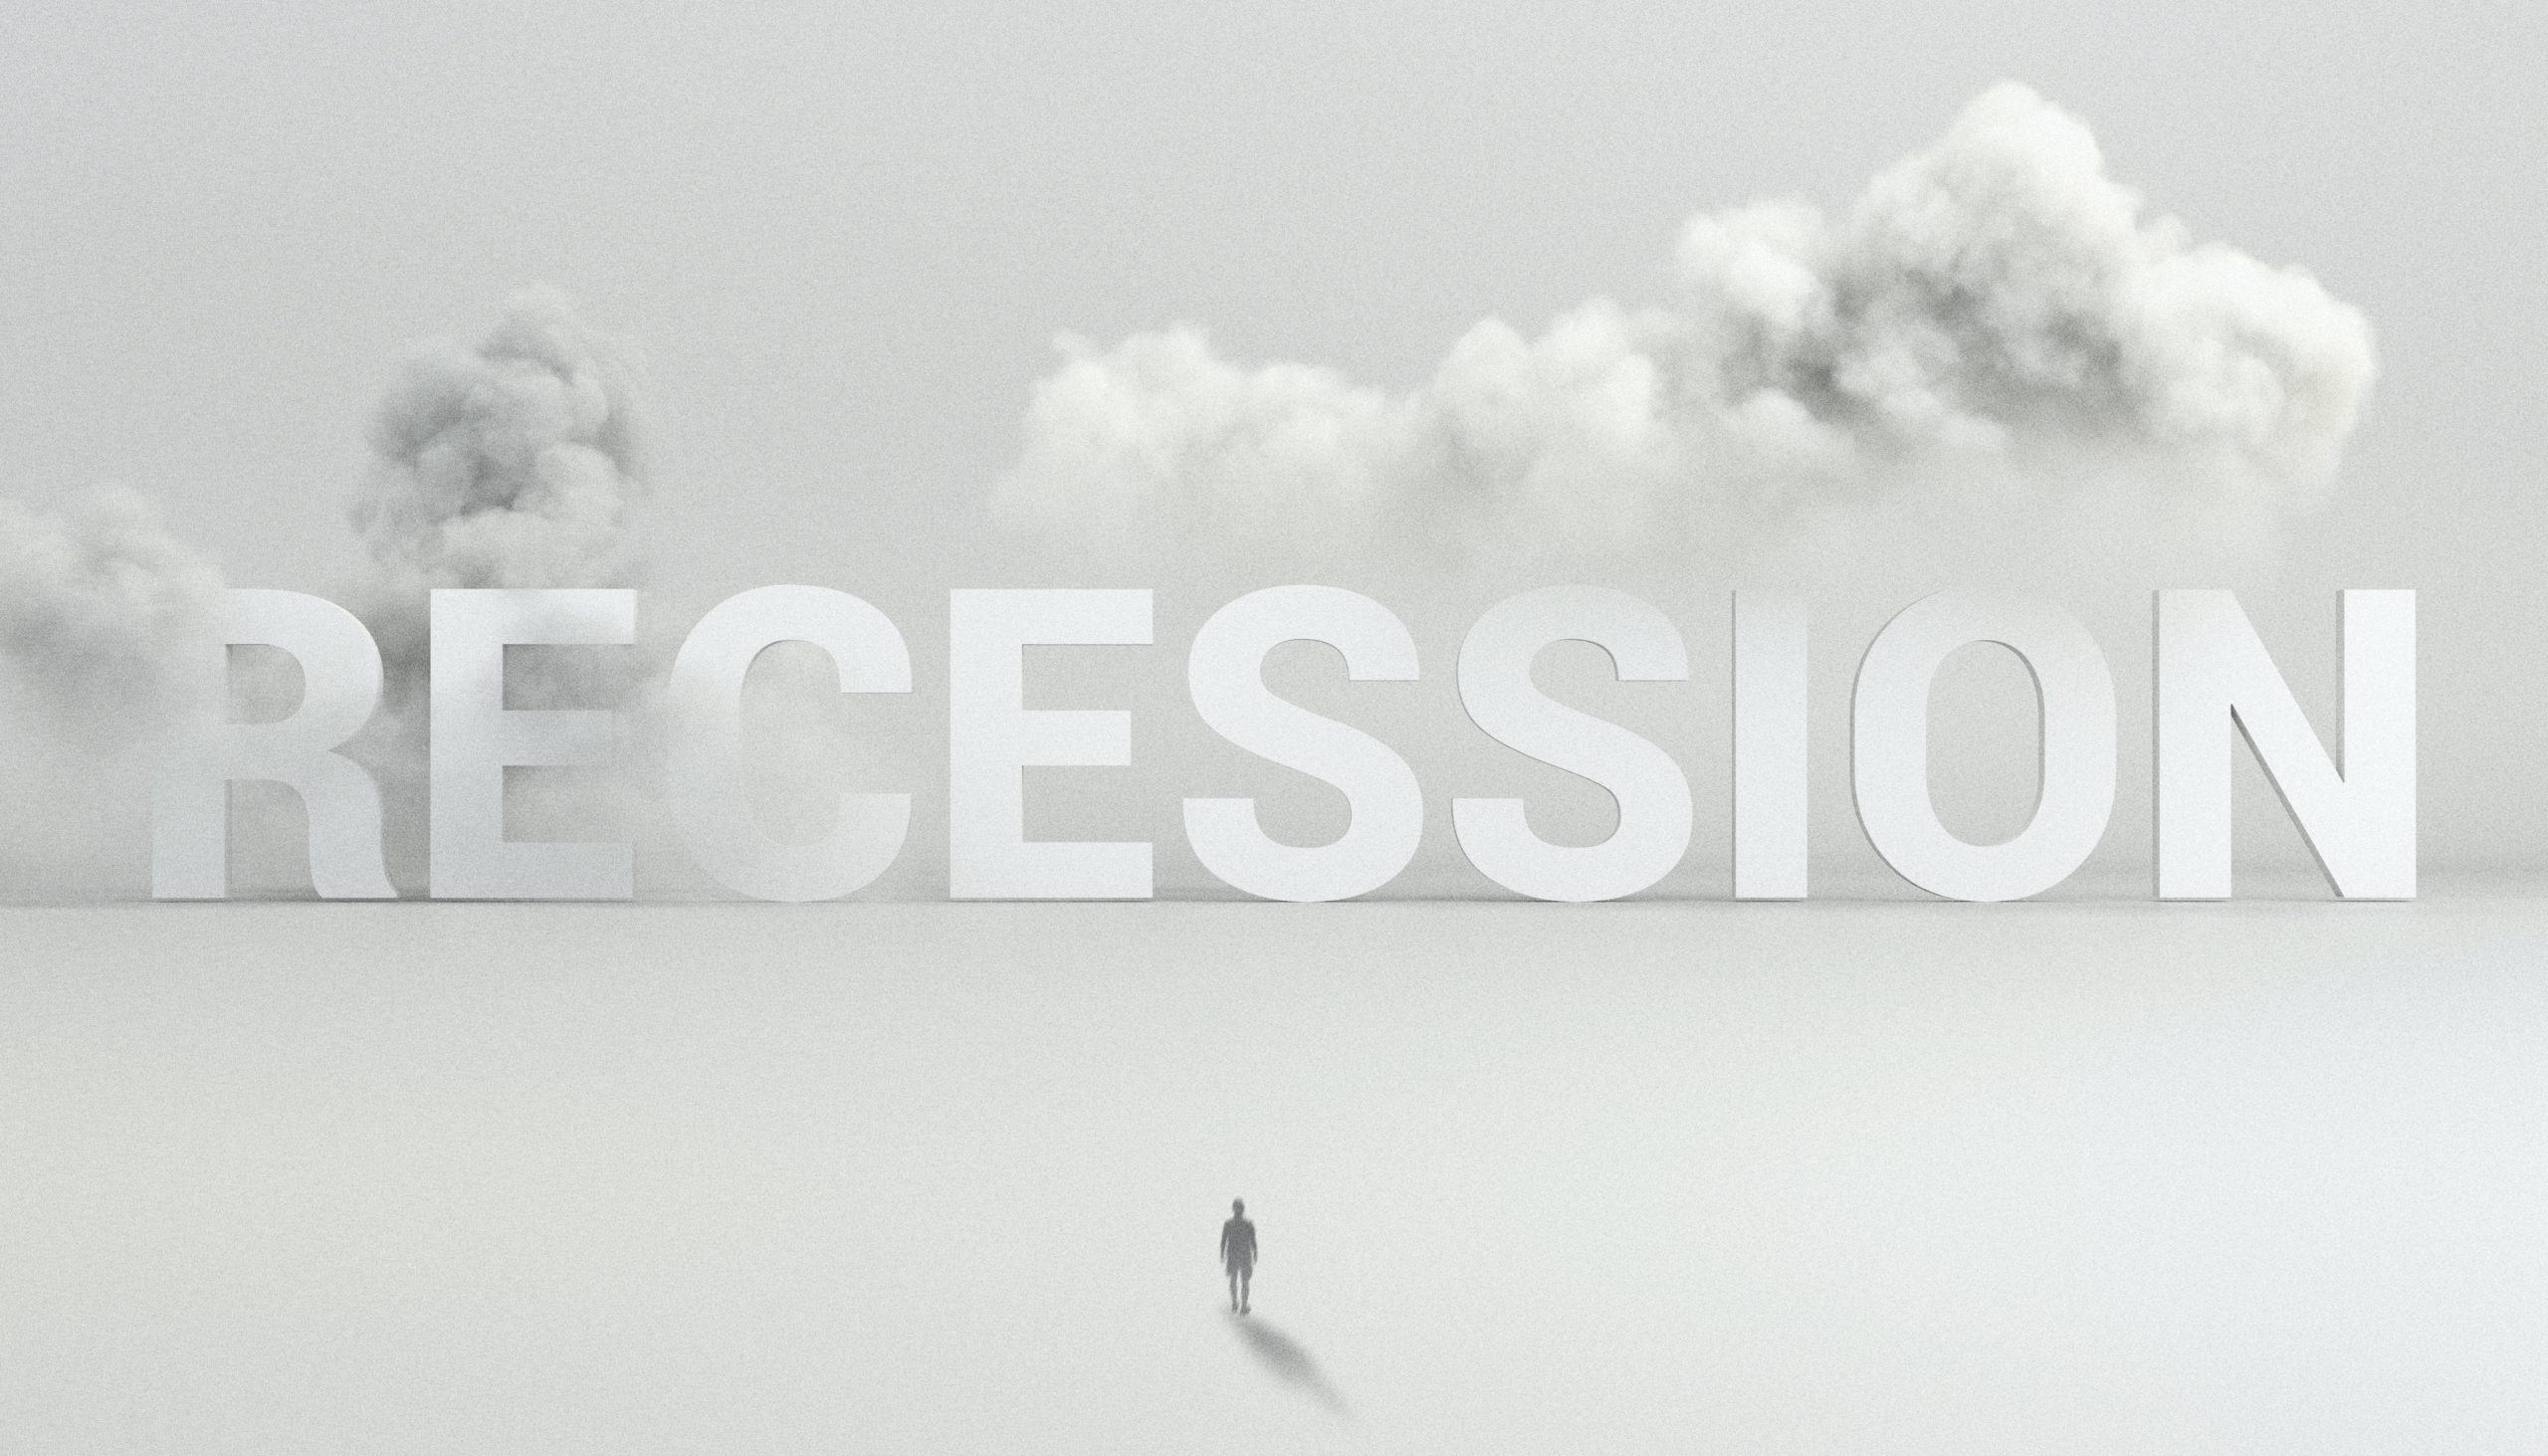 Recession: What’s in a Name?